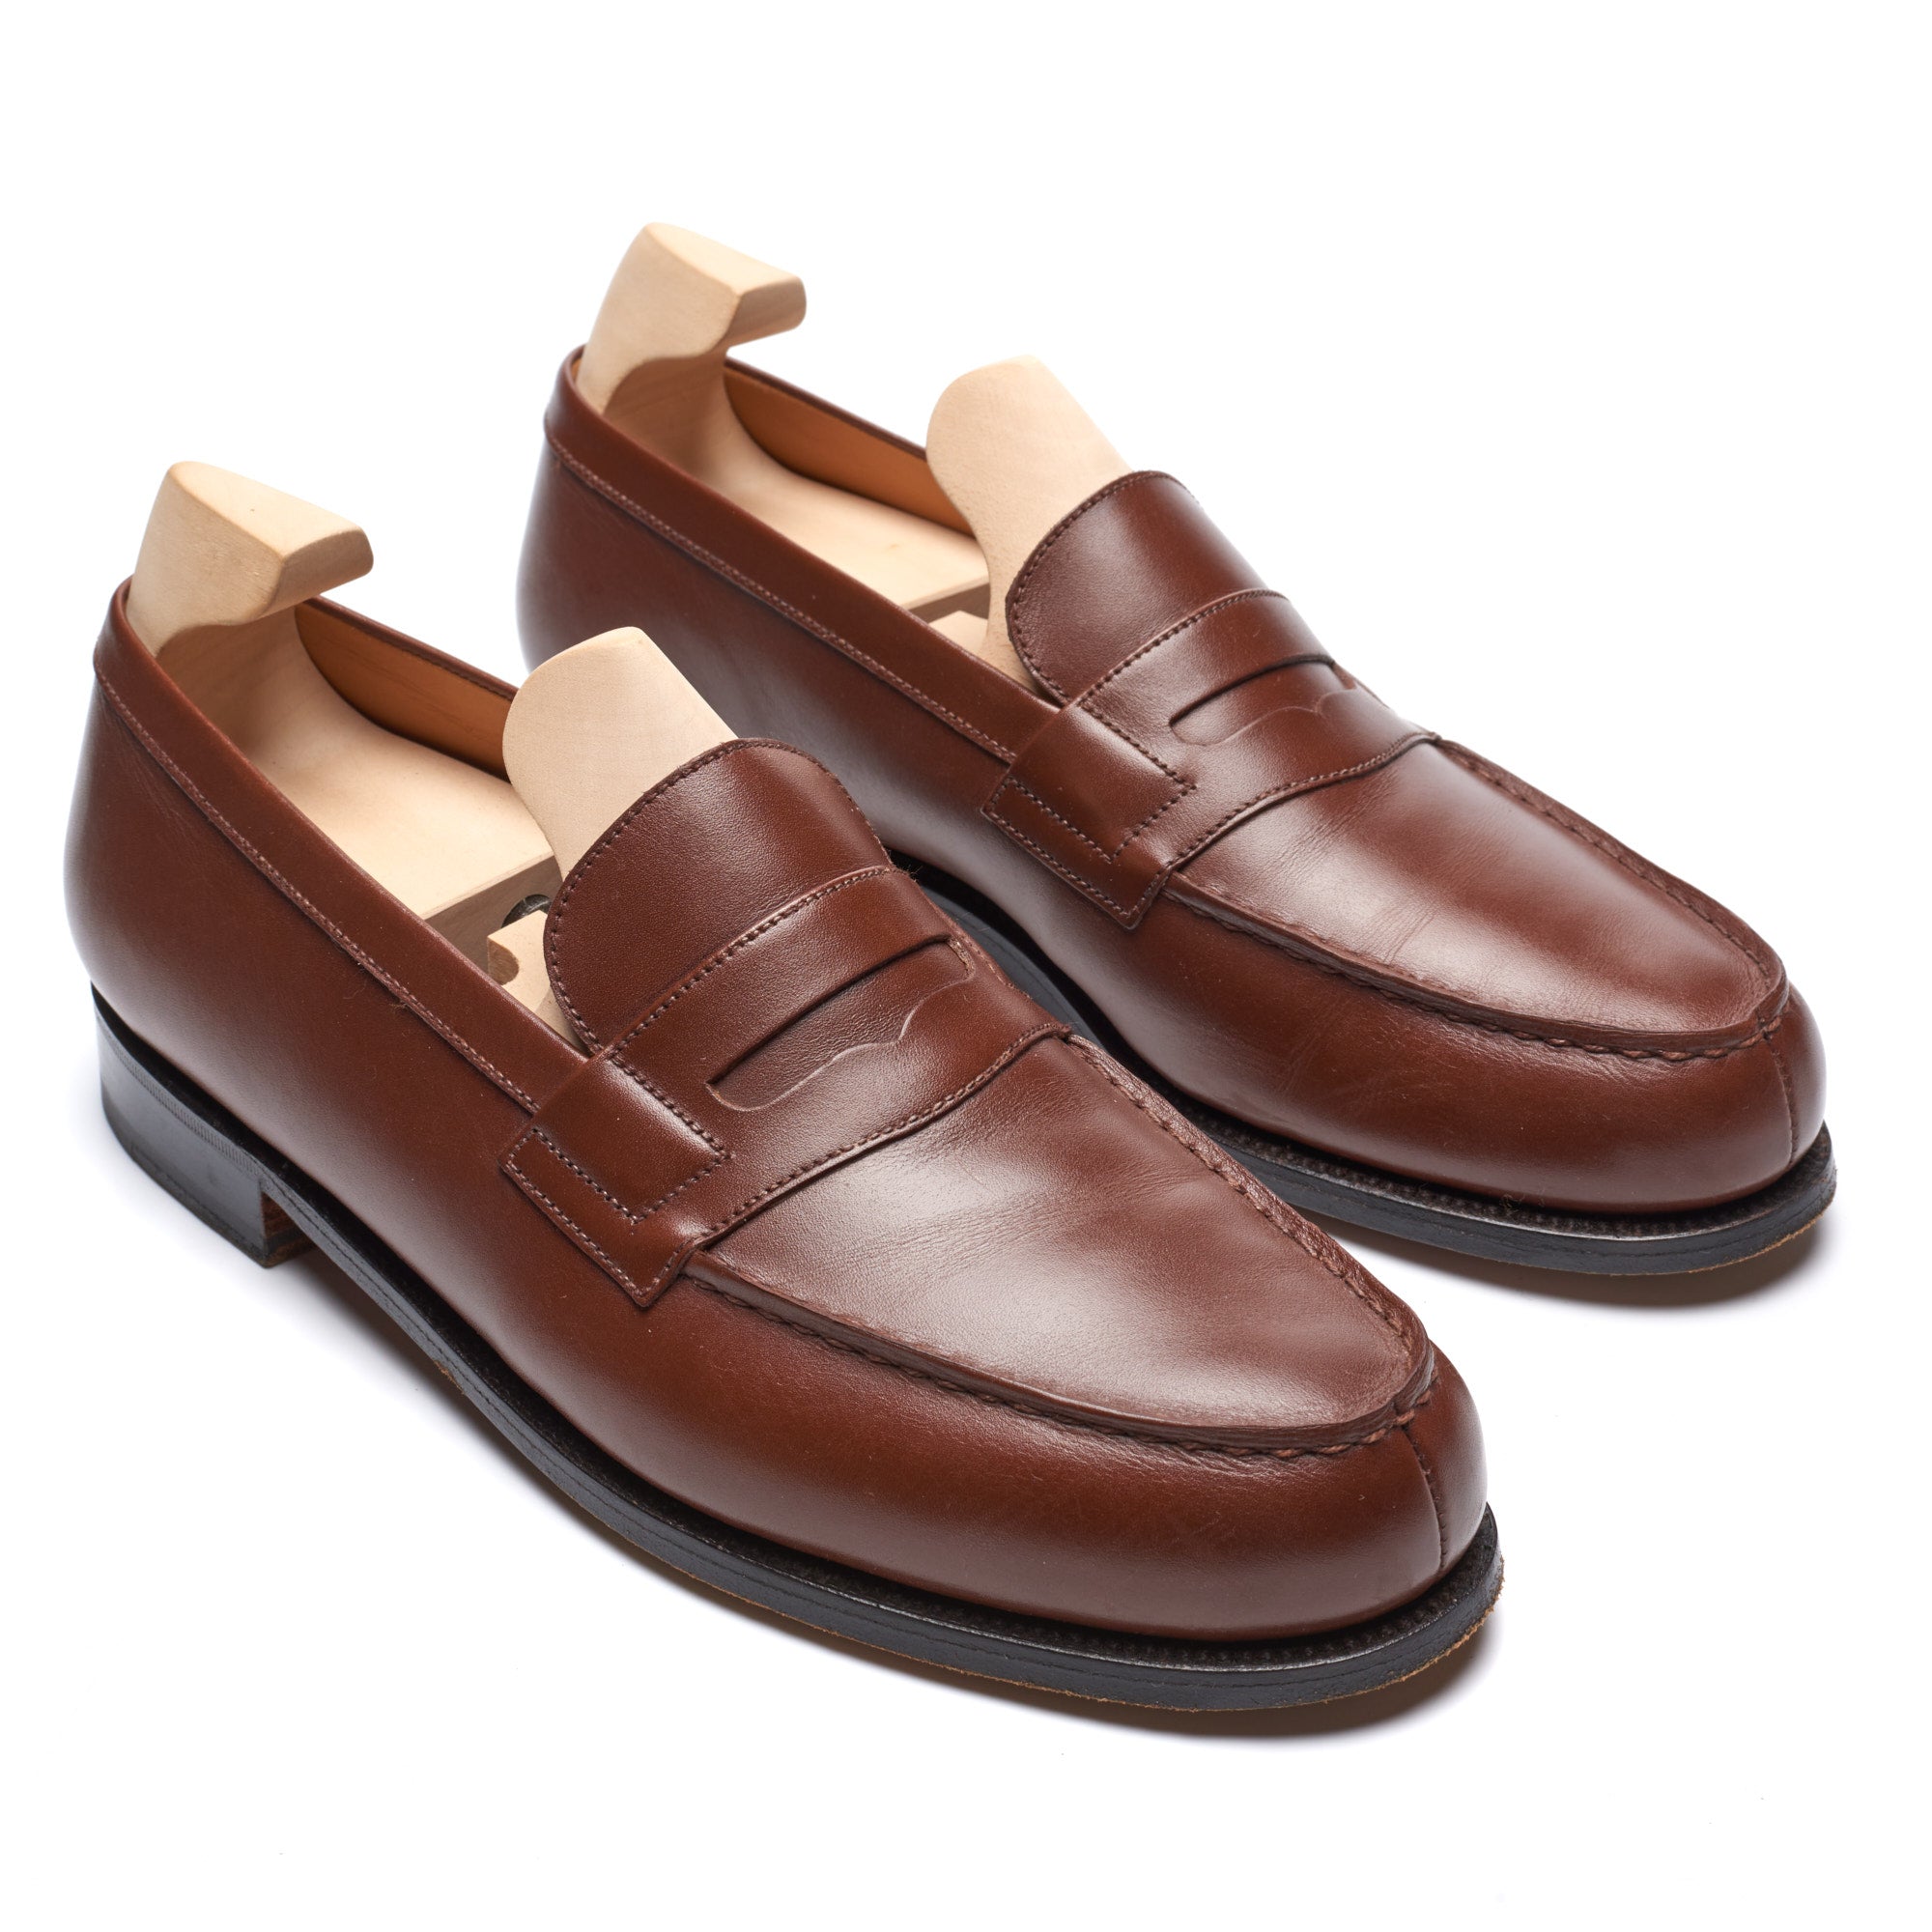 LOUIS VUITTON Men's Mocassin Brown Leather Shoes Penny Loafers Square Toe  7.5